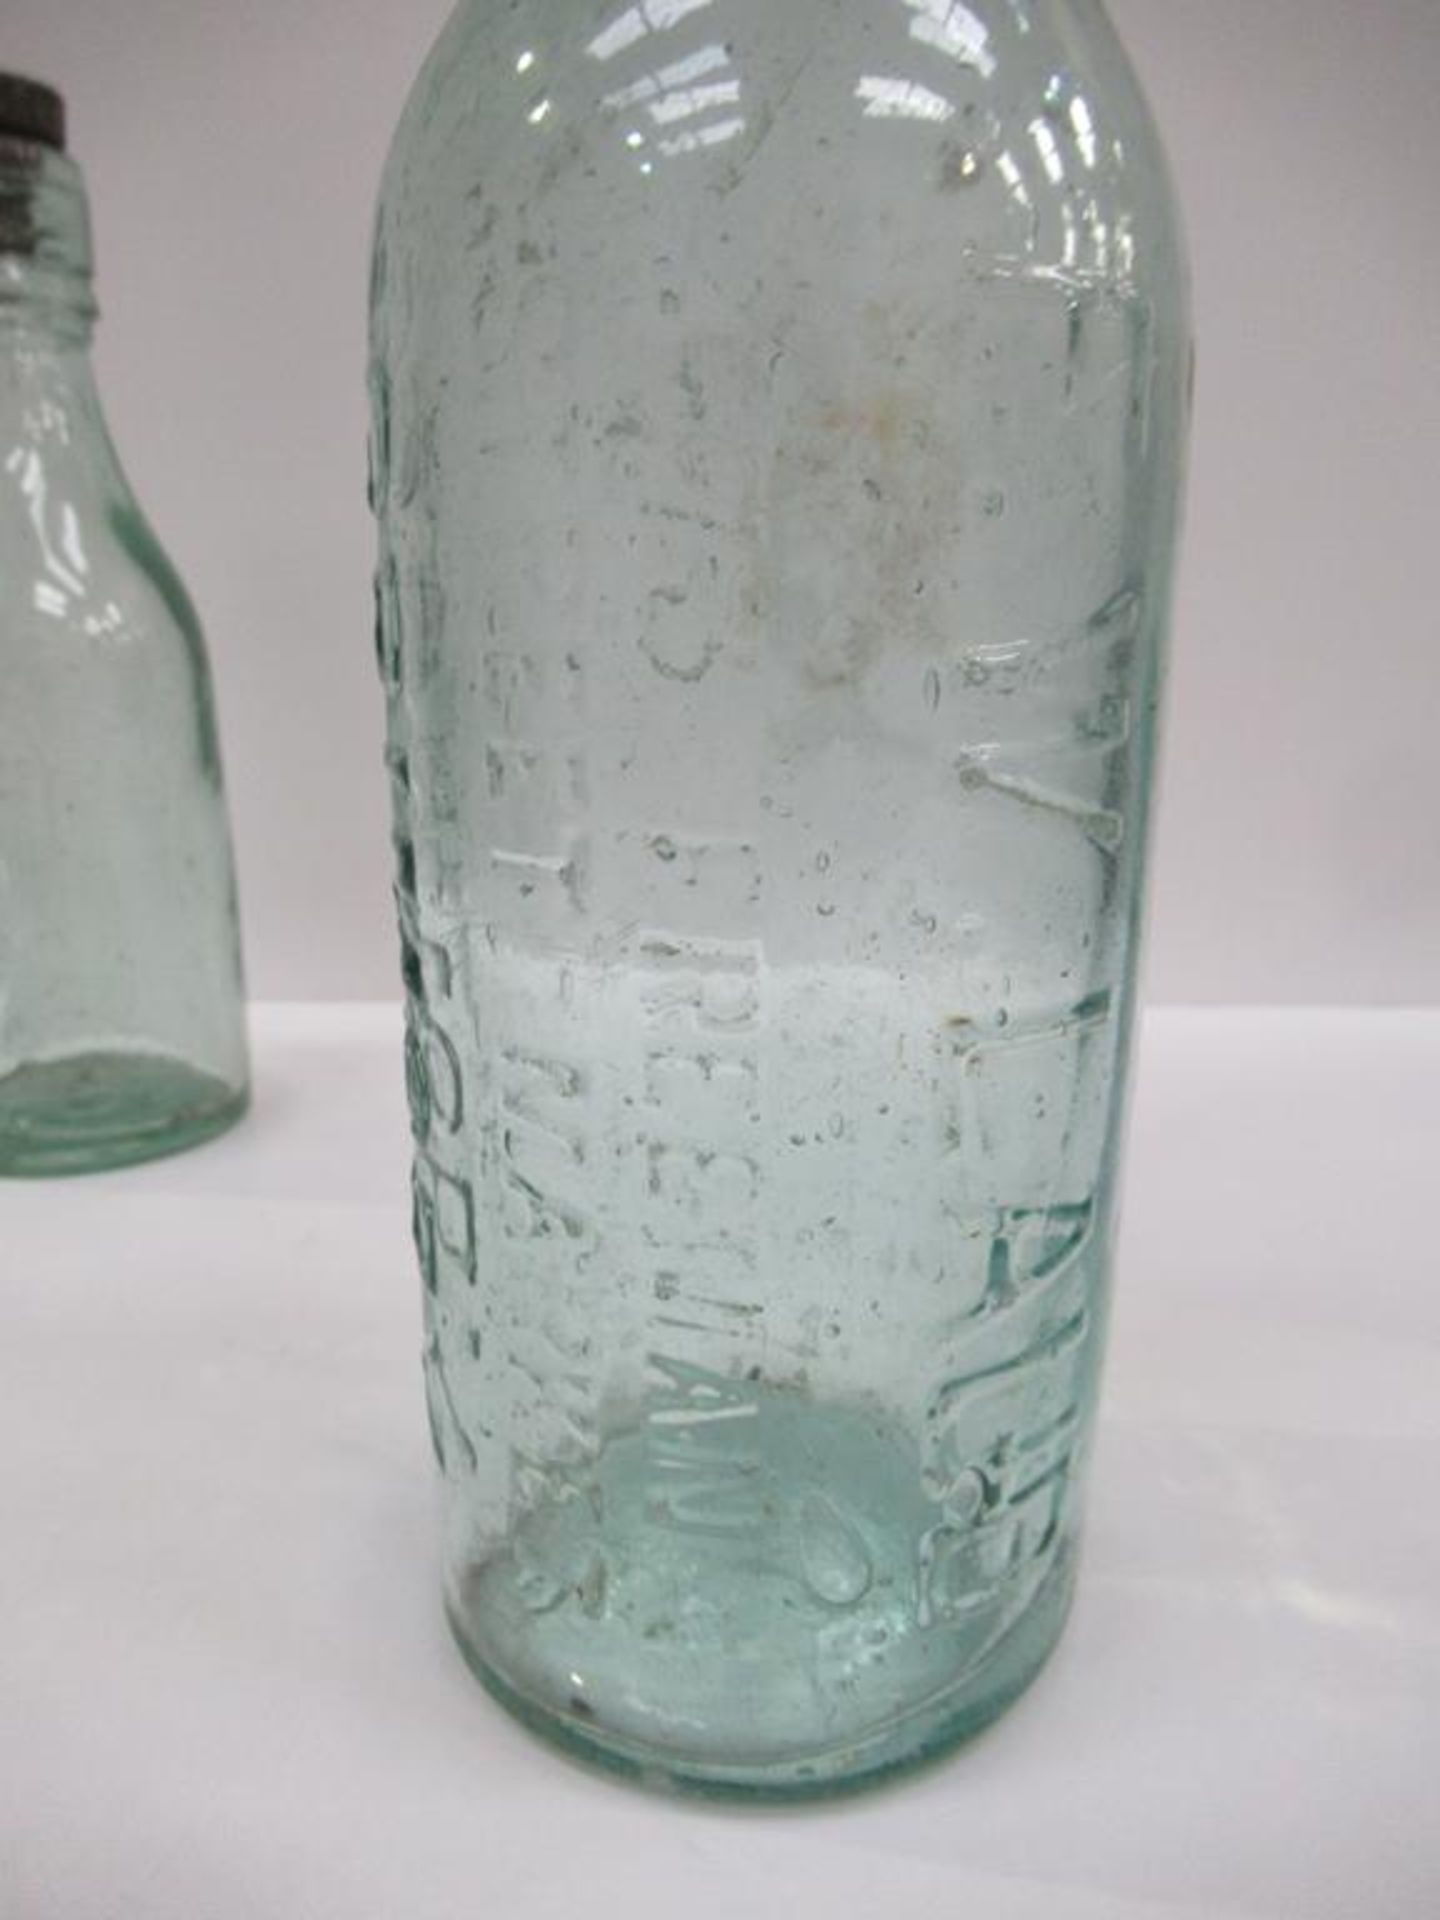 3x Grimsby F.W. Laud bottles with stoppers - Image 8 of 14